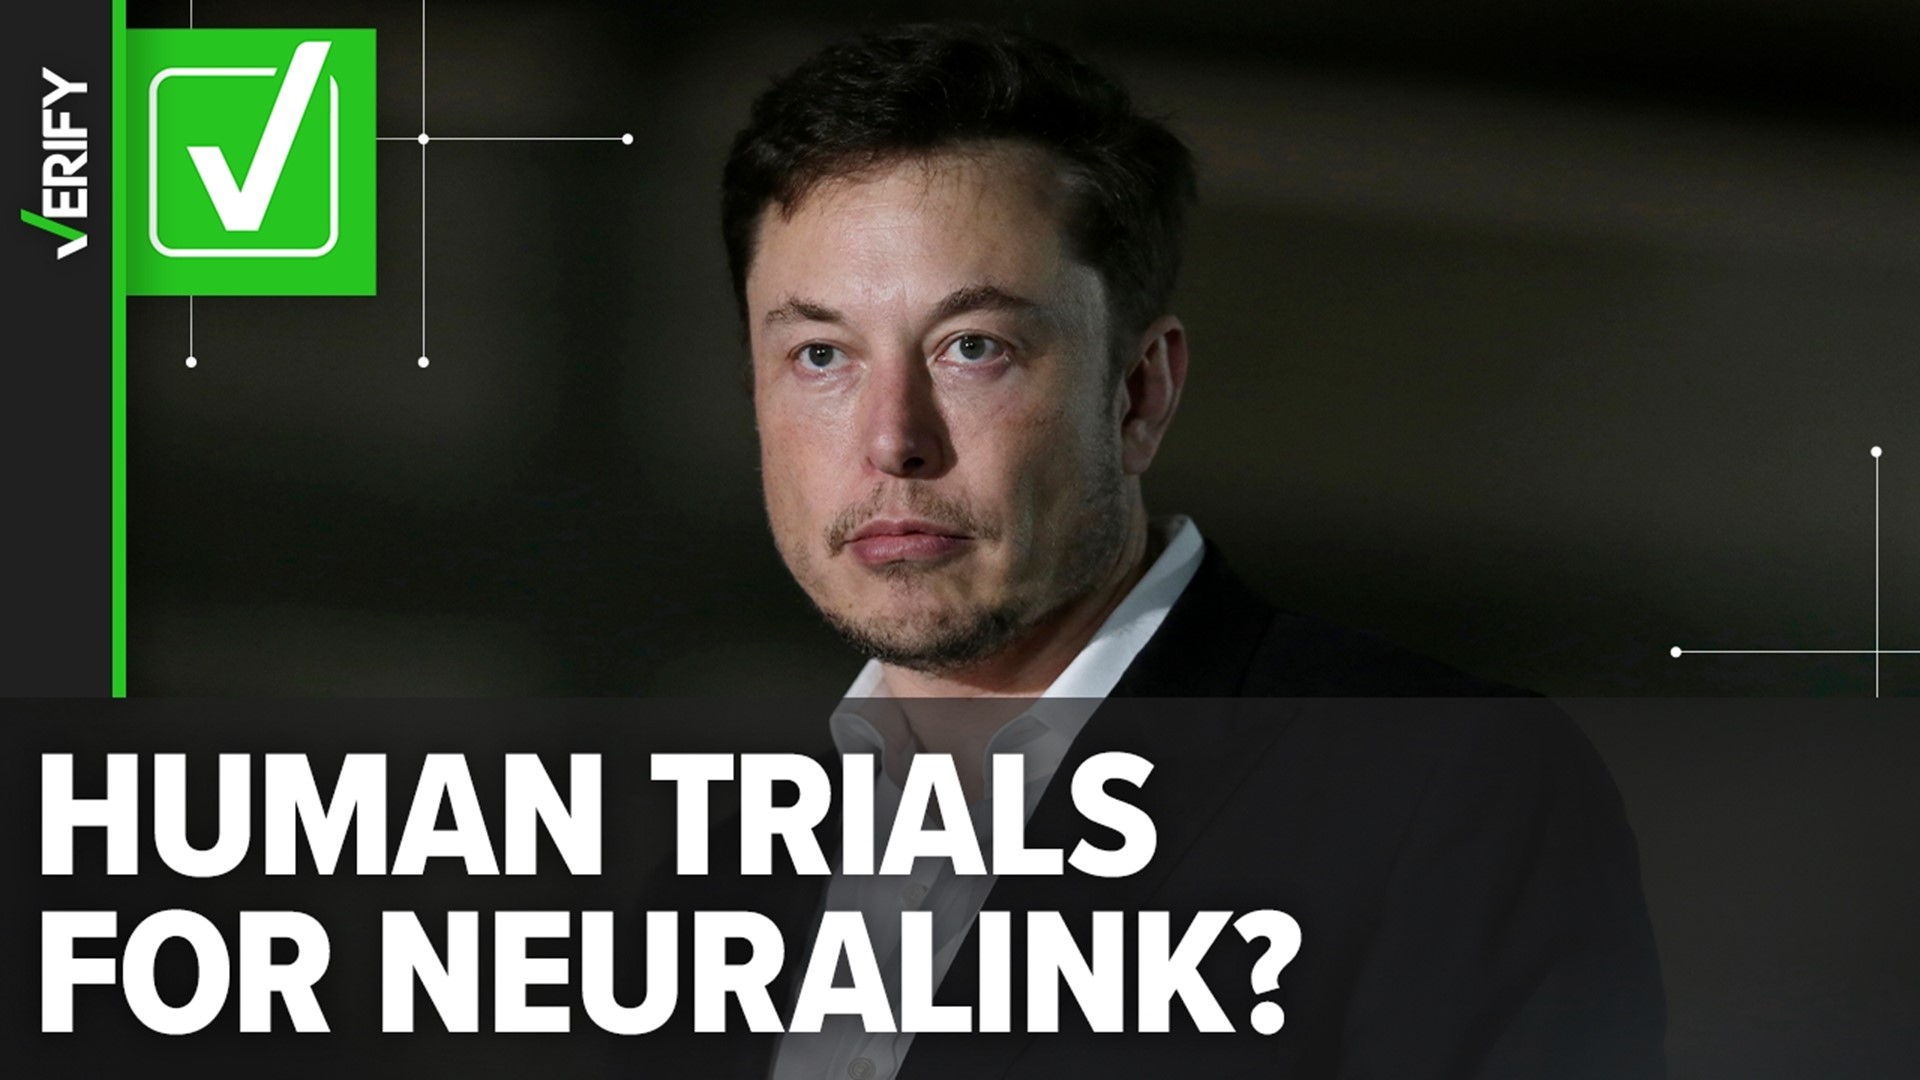 Elon Musk's Neuralink gets FDA approval for in-human study